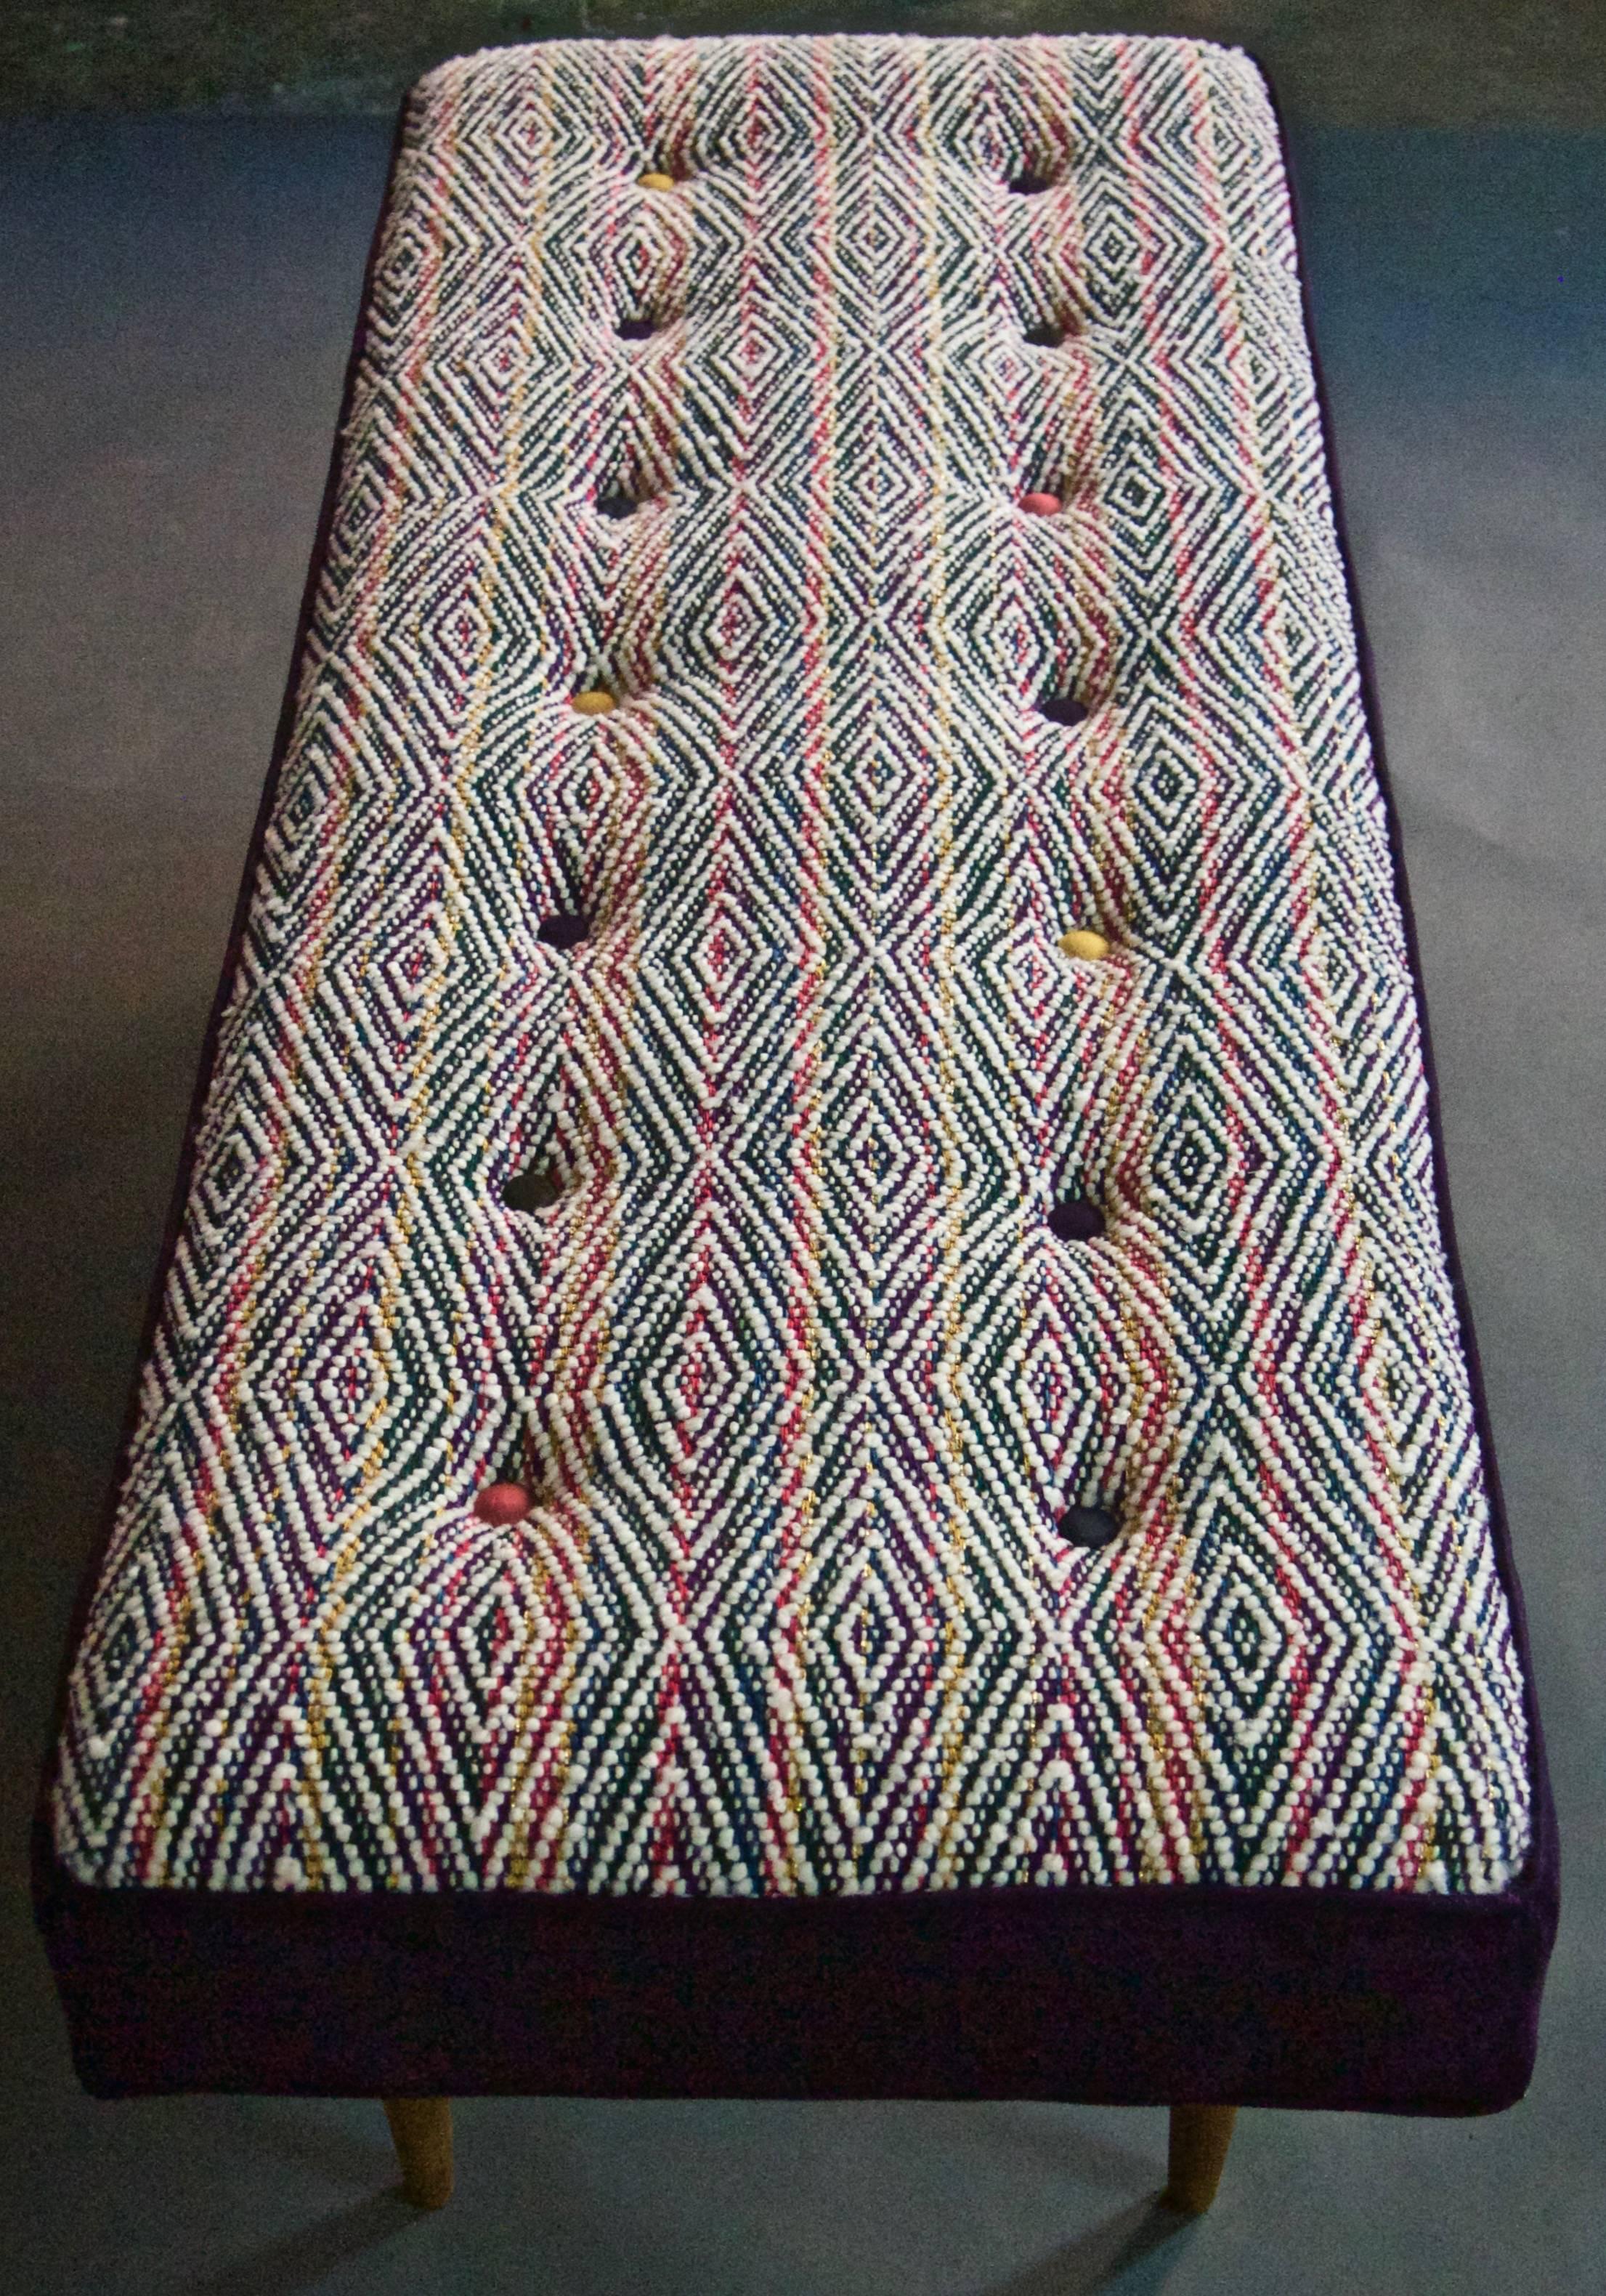 American Mid Century Inspired 14-Button Bench with Hand-Woven Textile Seat--in stock